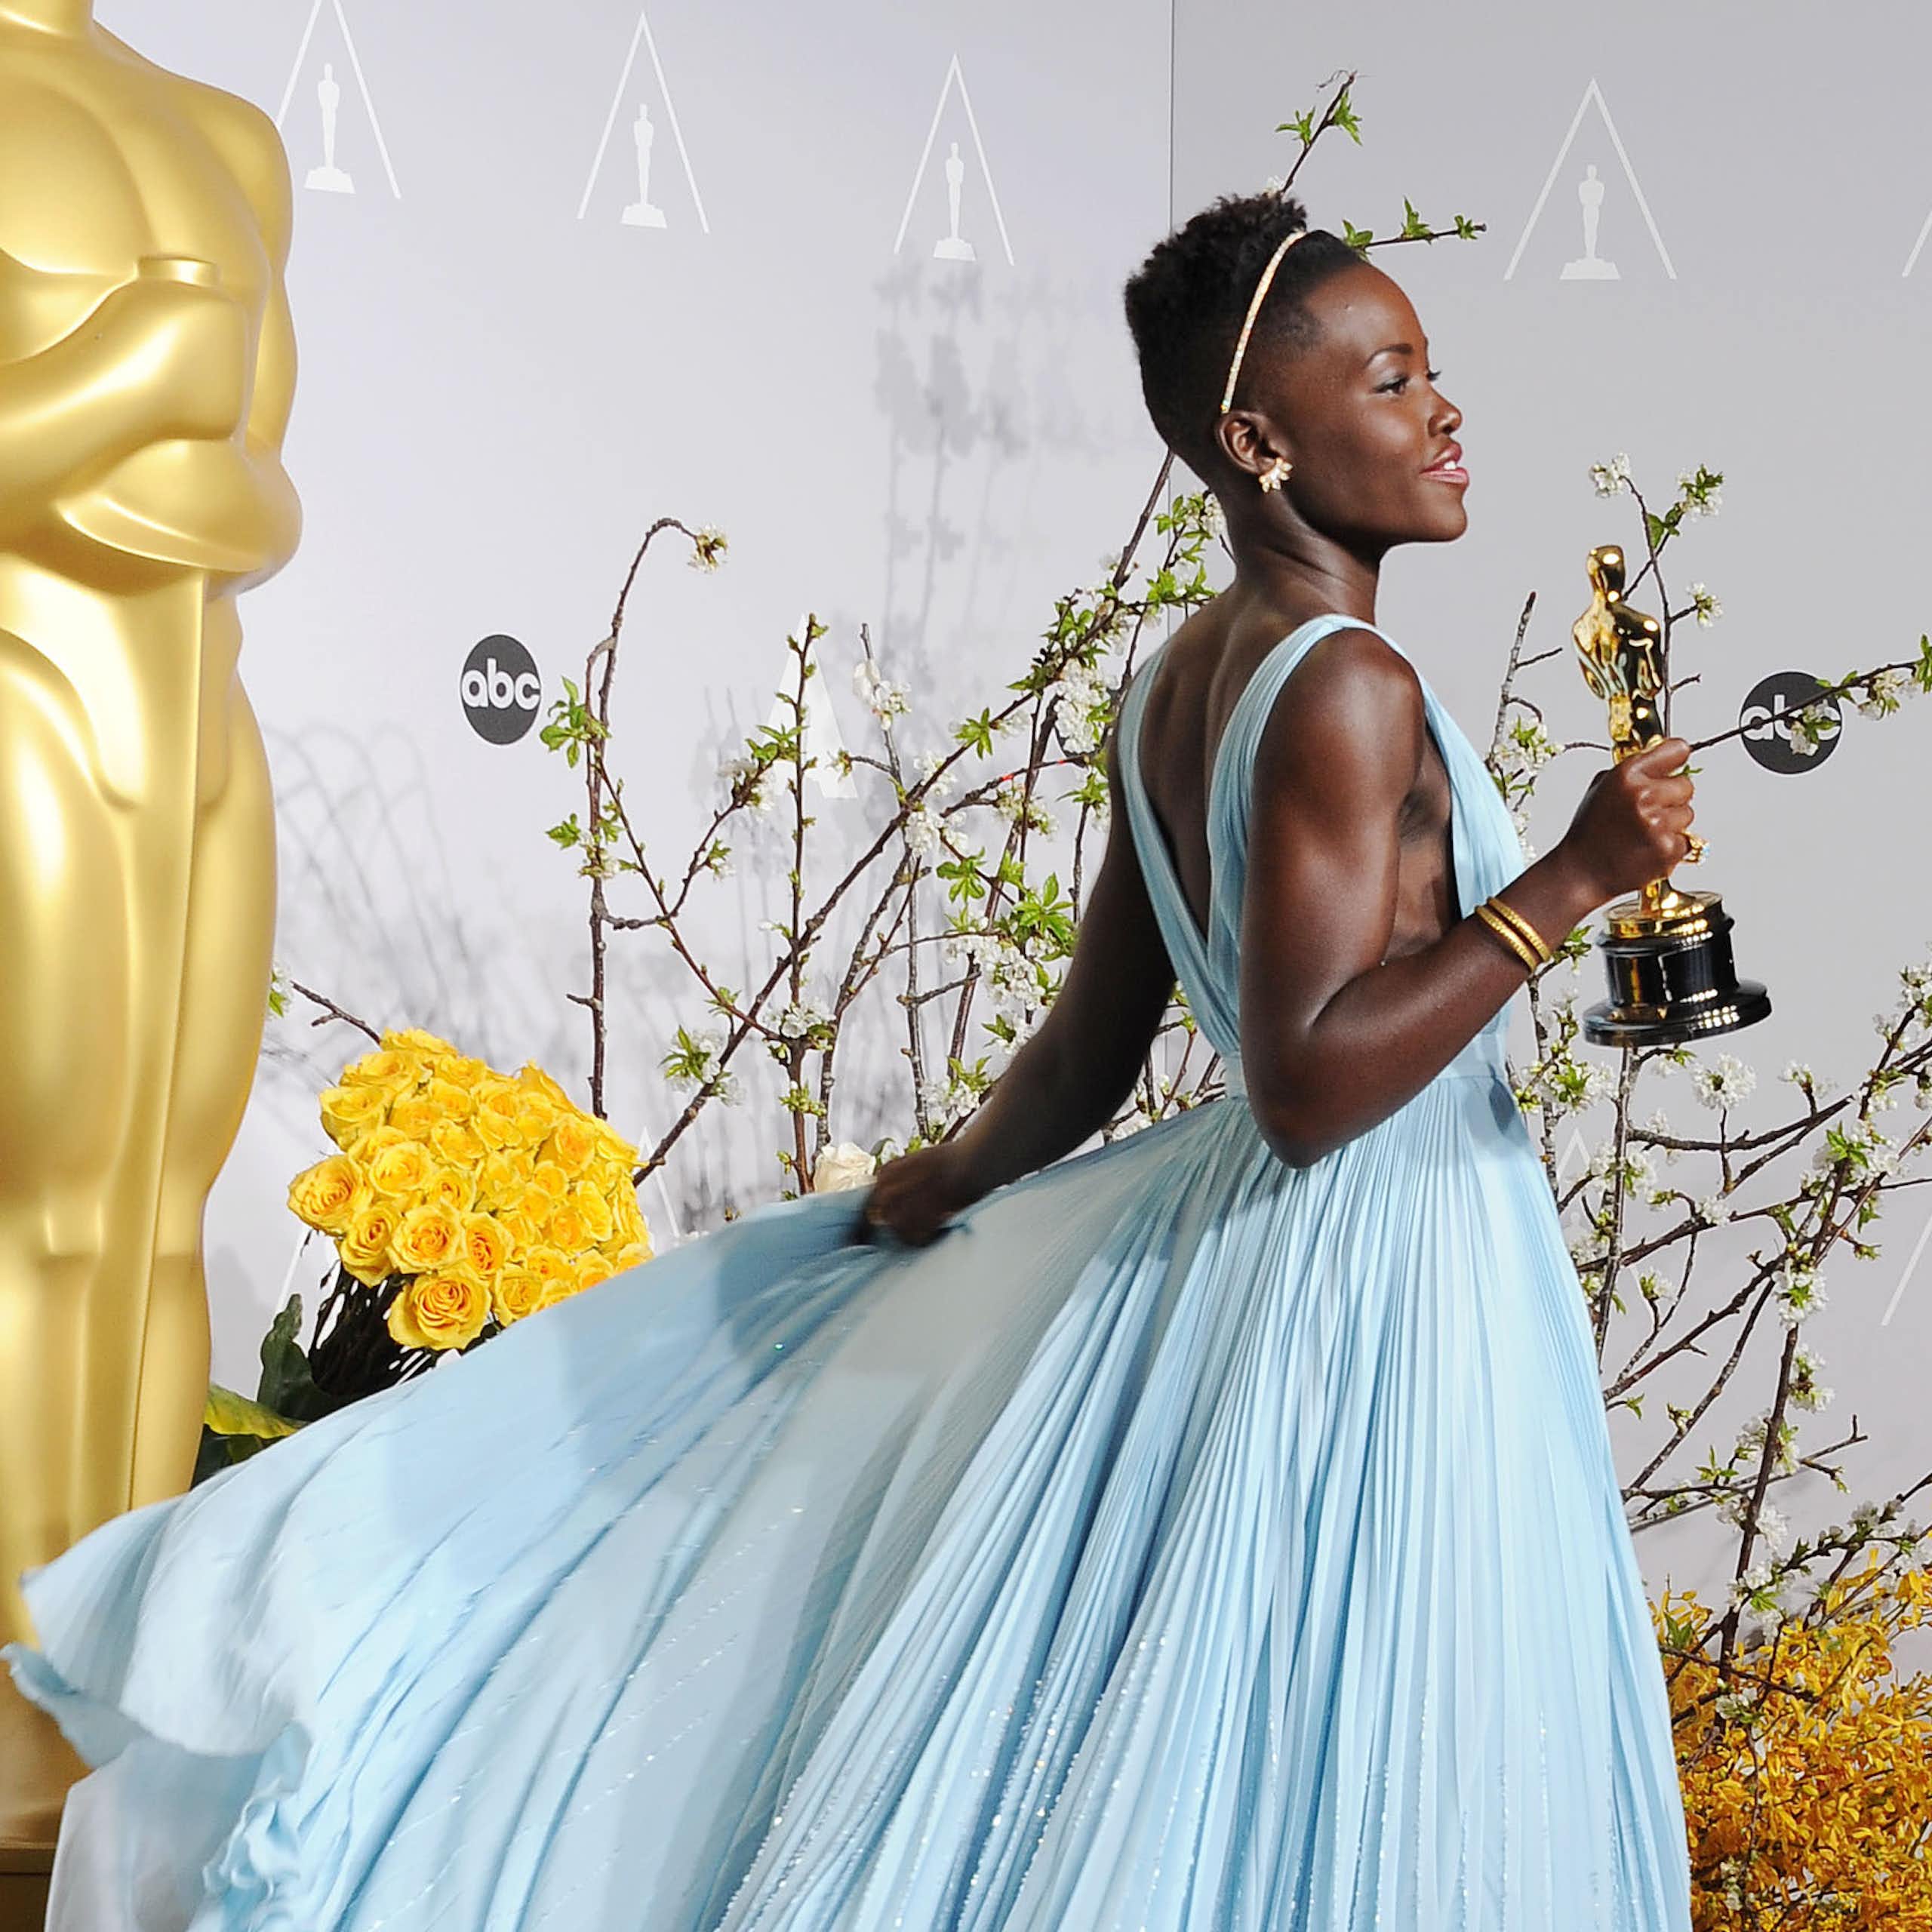 Young Black woman with short hair holds gold statuette while wearing a flowing powder blue dress.